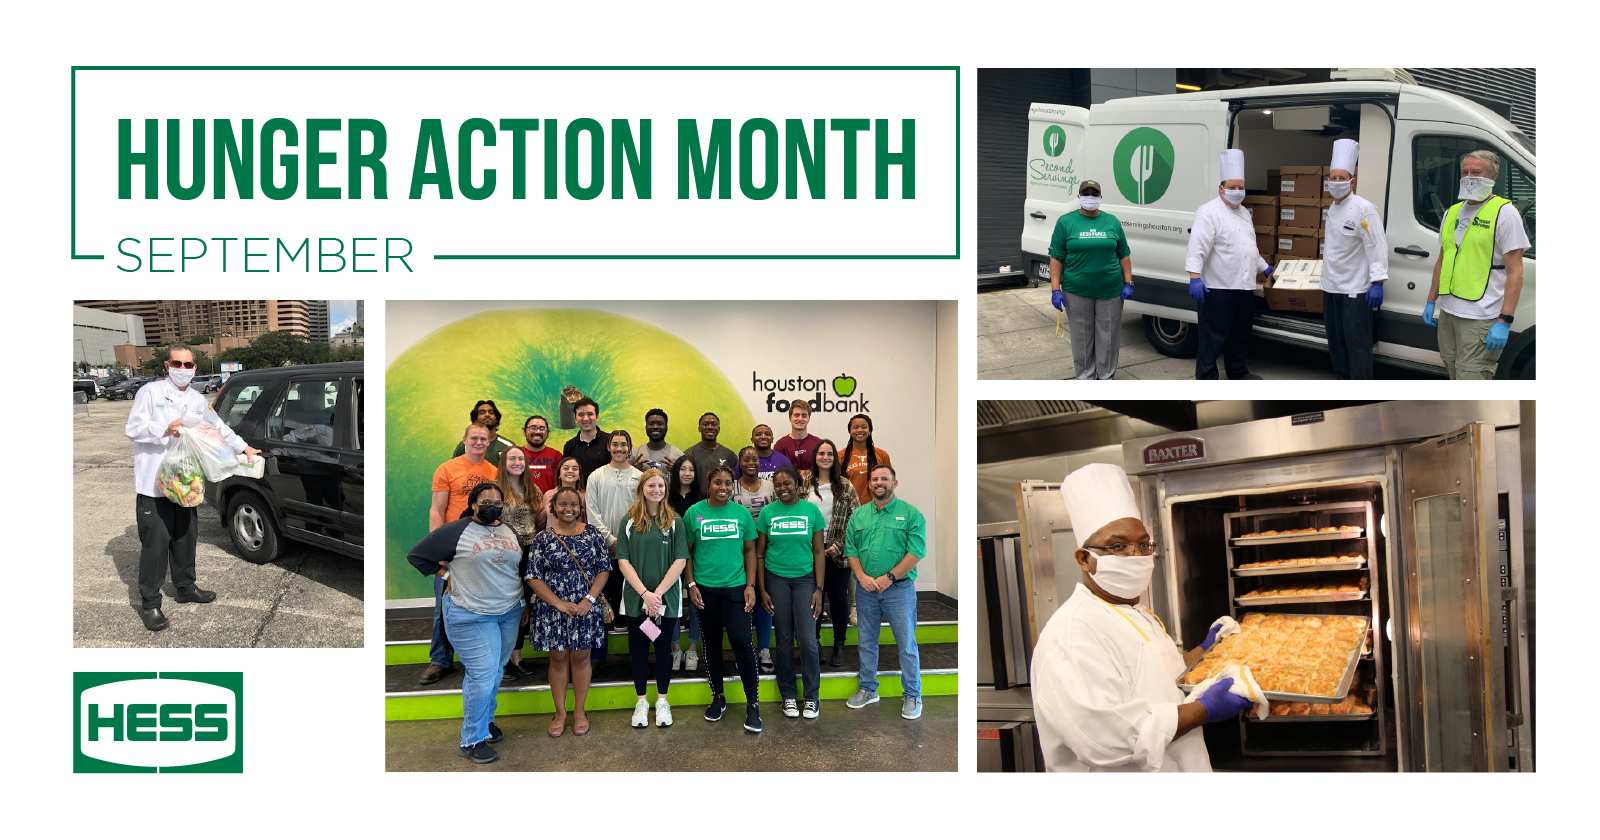 Hess Recognizes Hunger Action Month